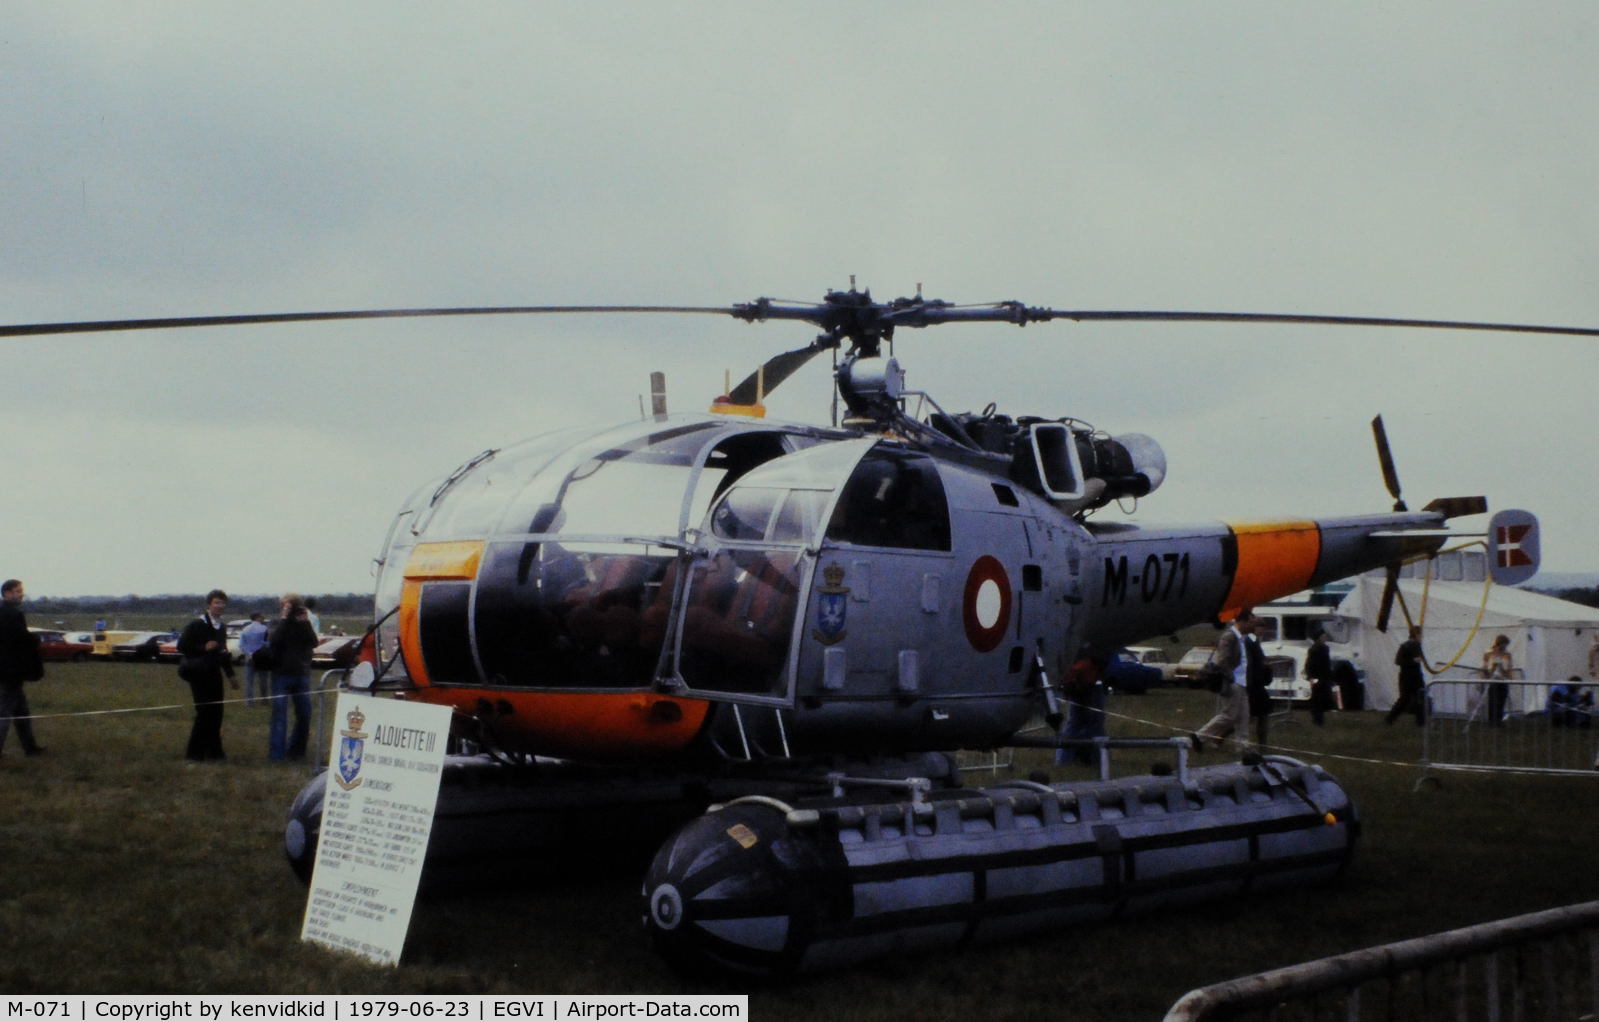 M-071, 1963 Sud SA-3160 Alouette III C/N 1071, At the 1979 International Air Tattoo Greenham Common, copied from slide.